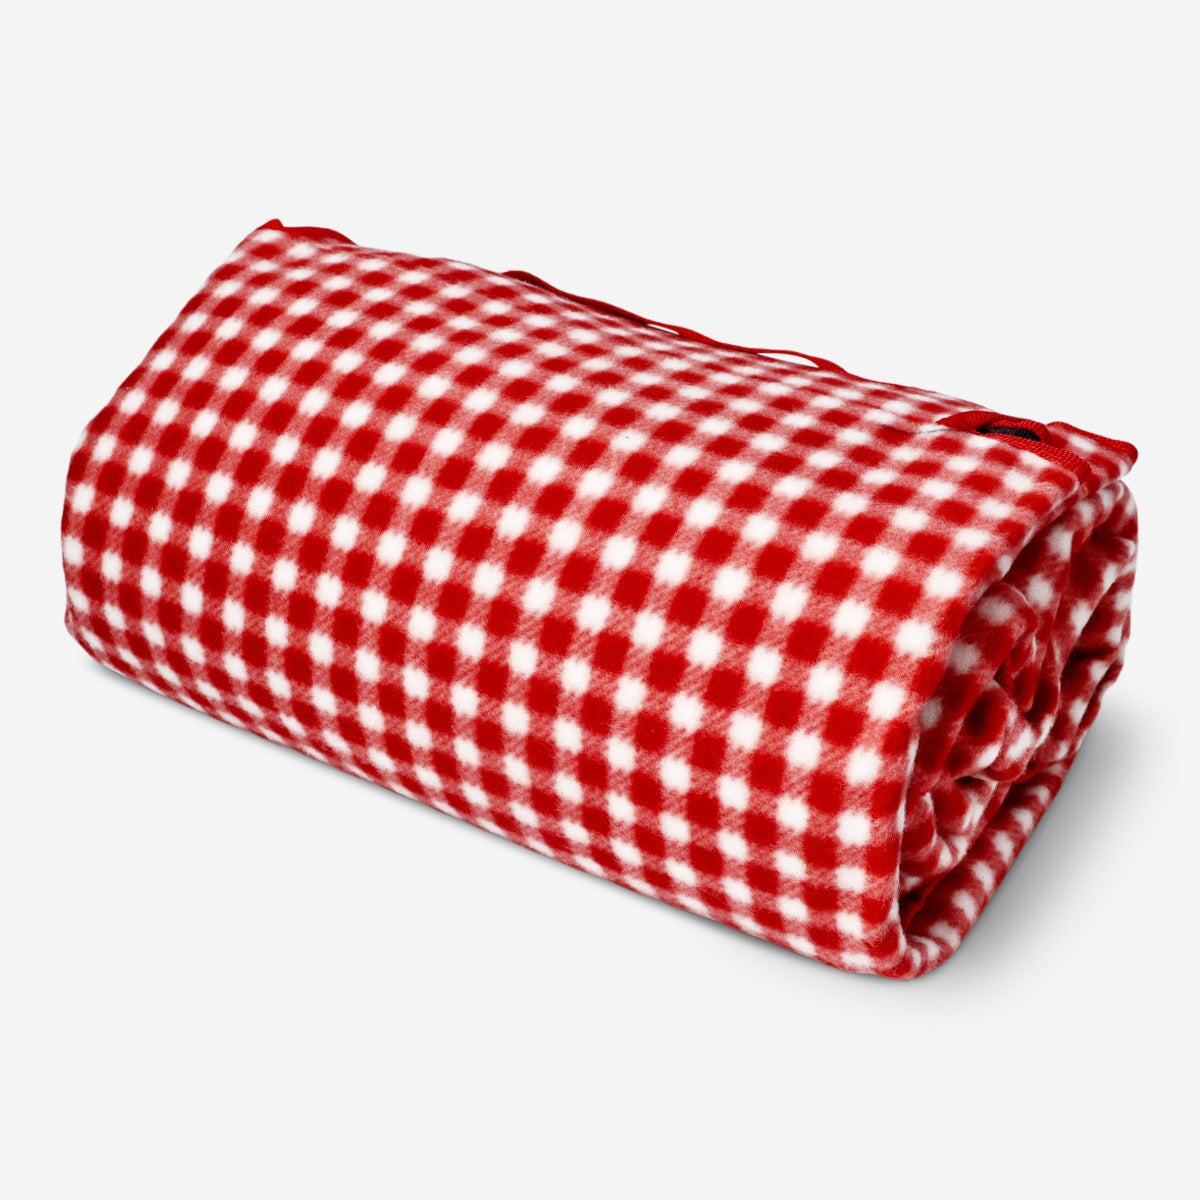 Picnic blanket. With carrying strap Home Flying Tiger Copenhagen 